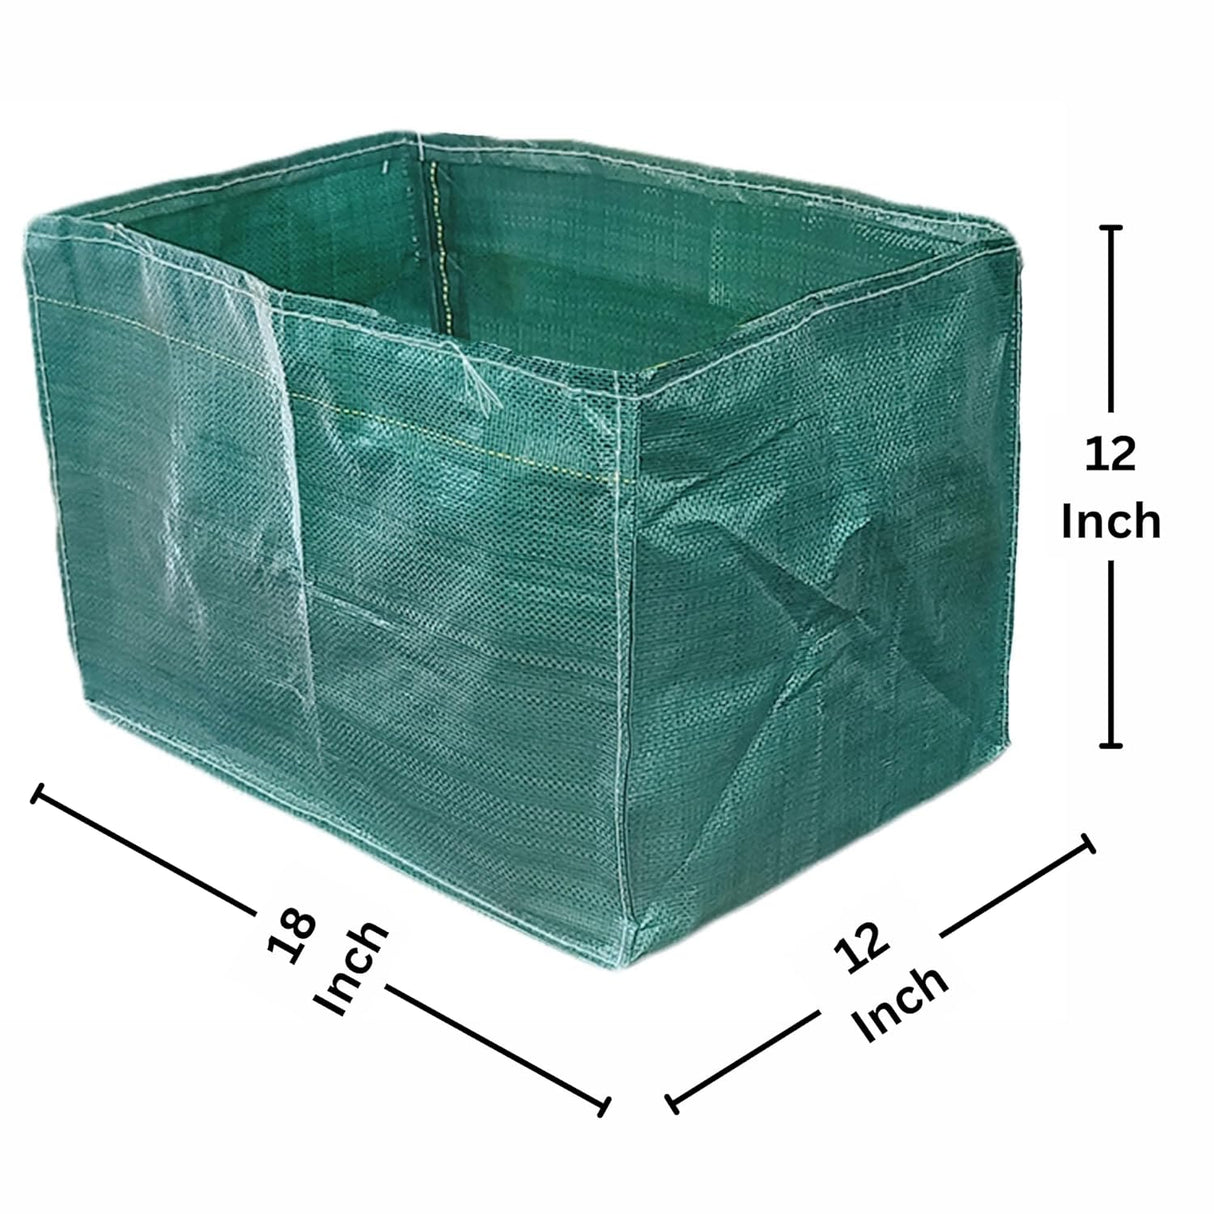 18x12x12 Inches Rectangular HDPE Grow Bags UV Protected Green Colour for Terrace and Vegetable Gardening, 2 Packs